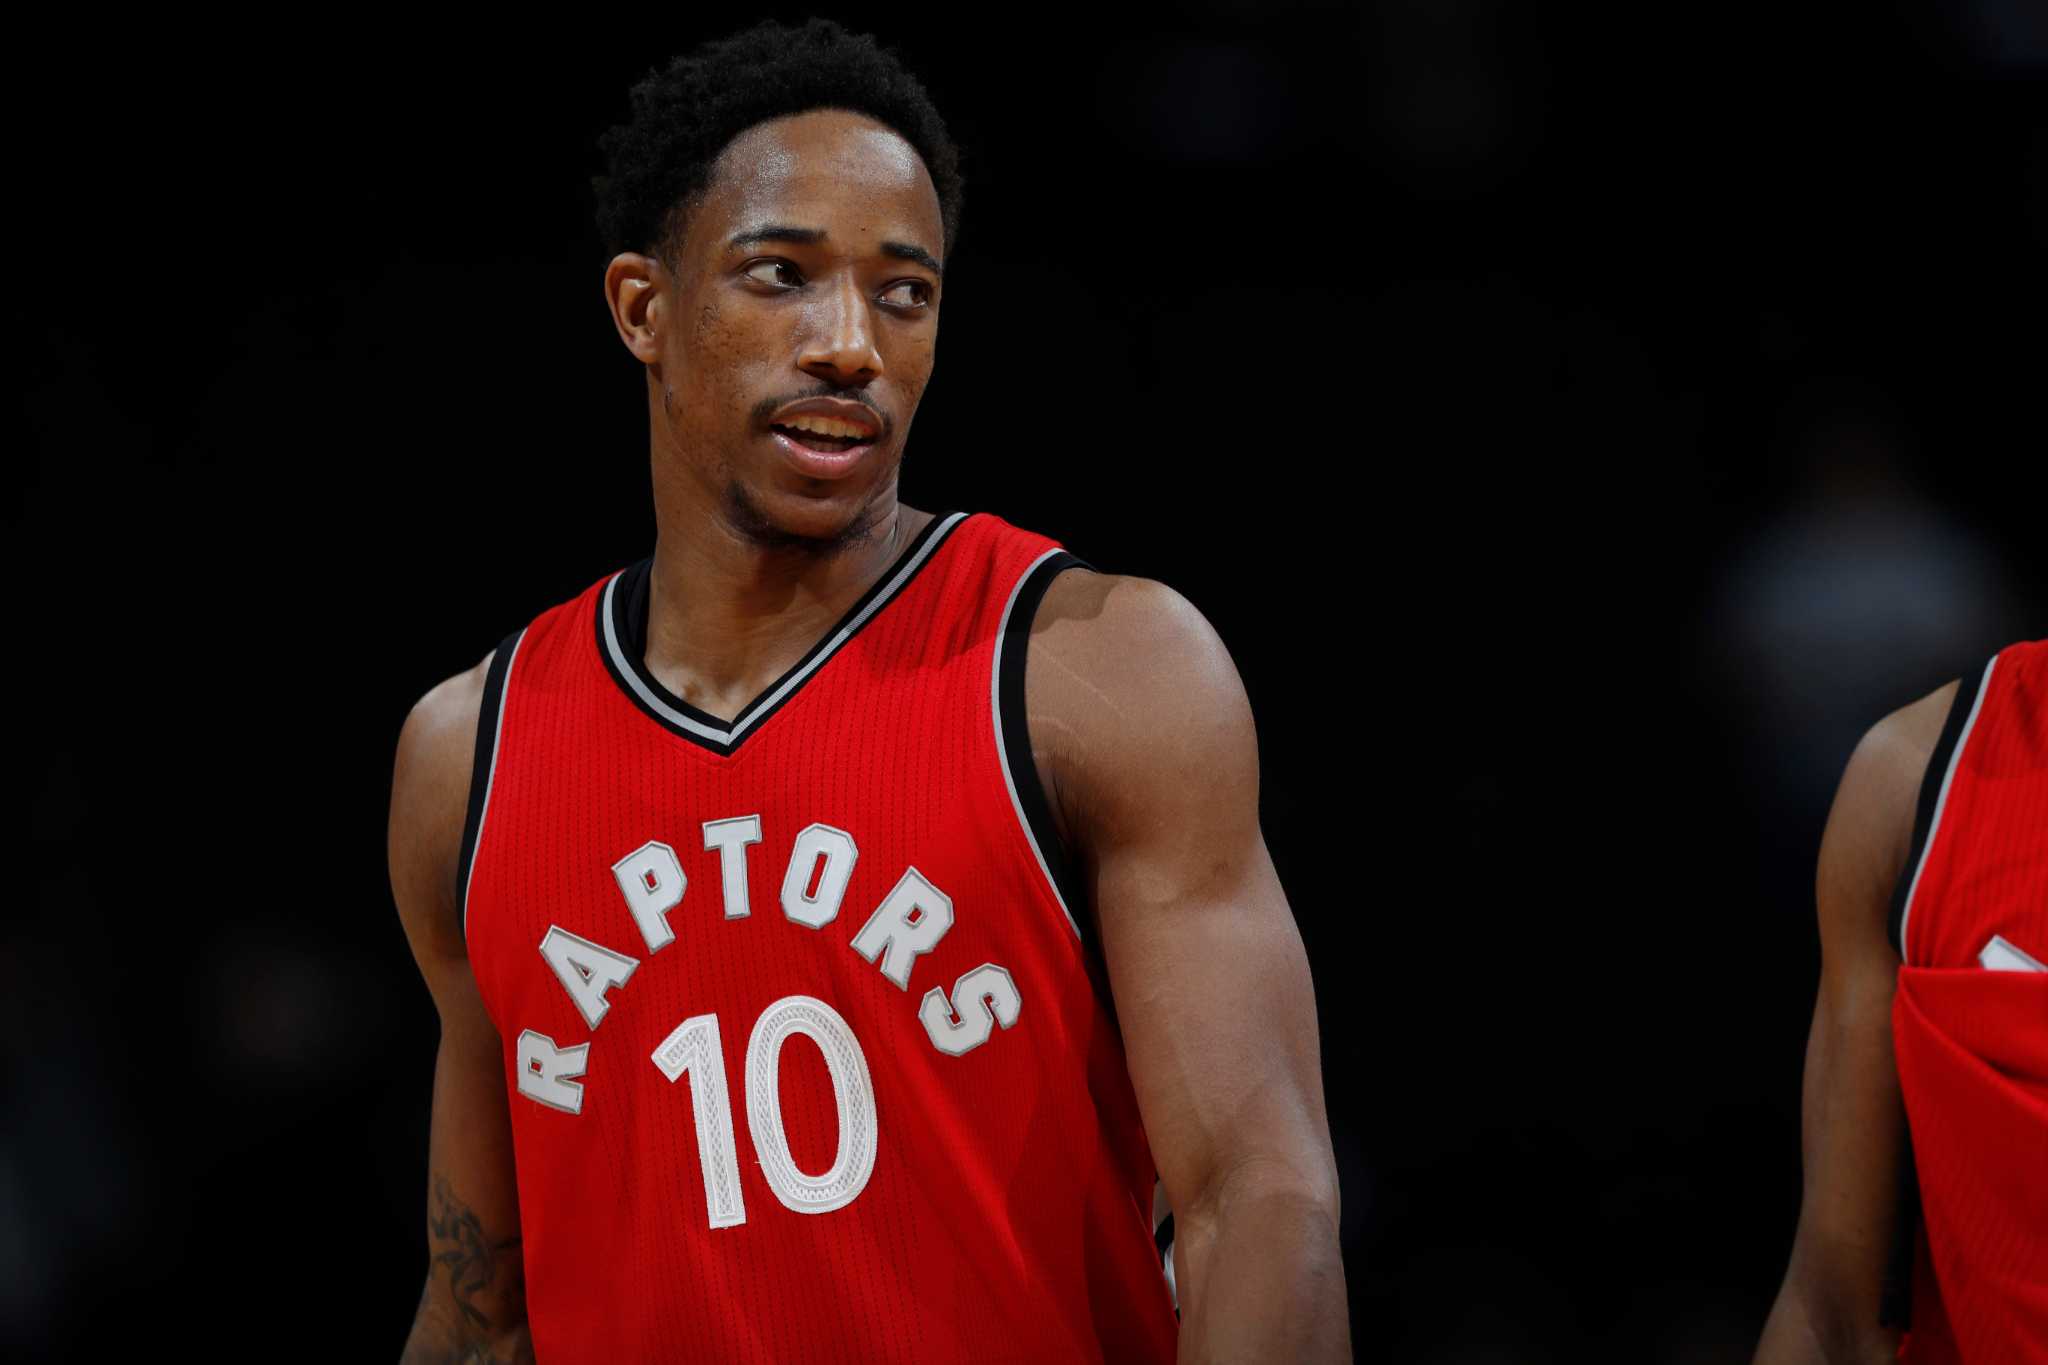 Raptors need to figure out what's wrong with DeRozan's shot